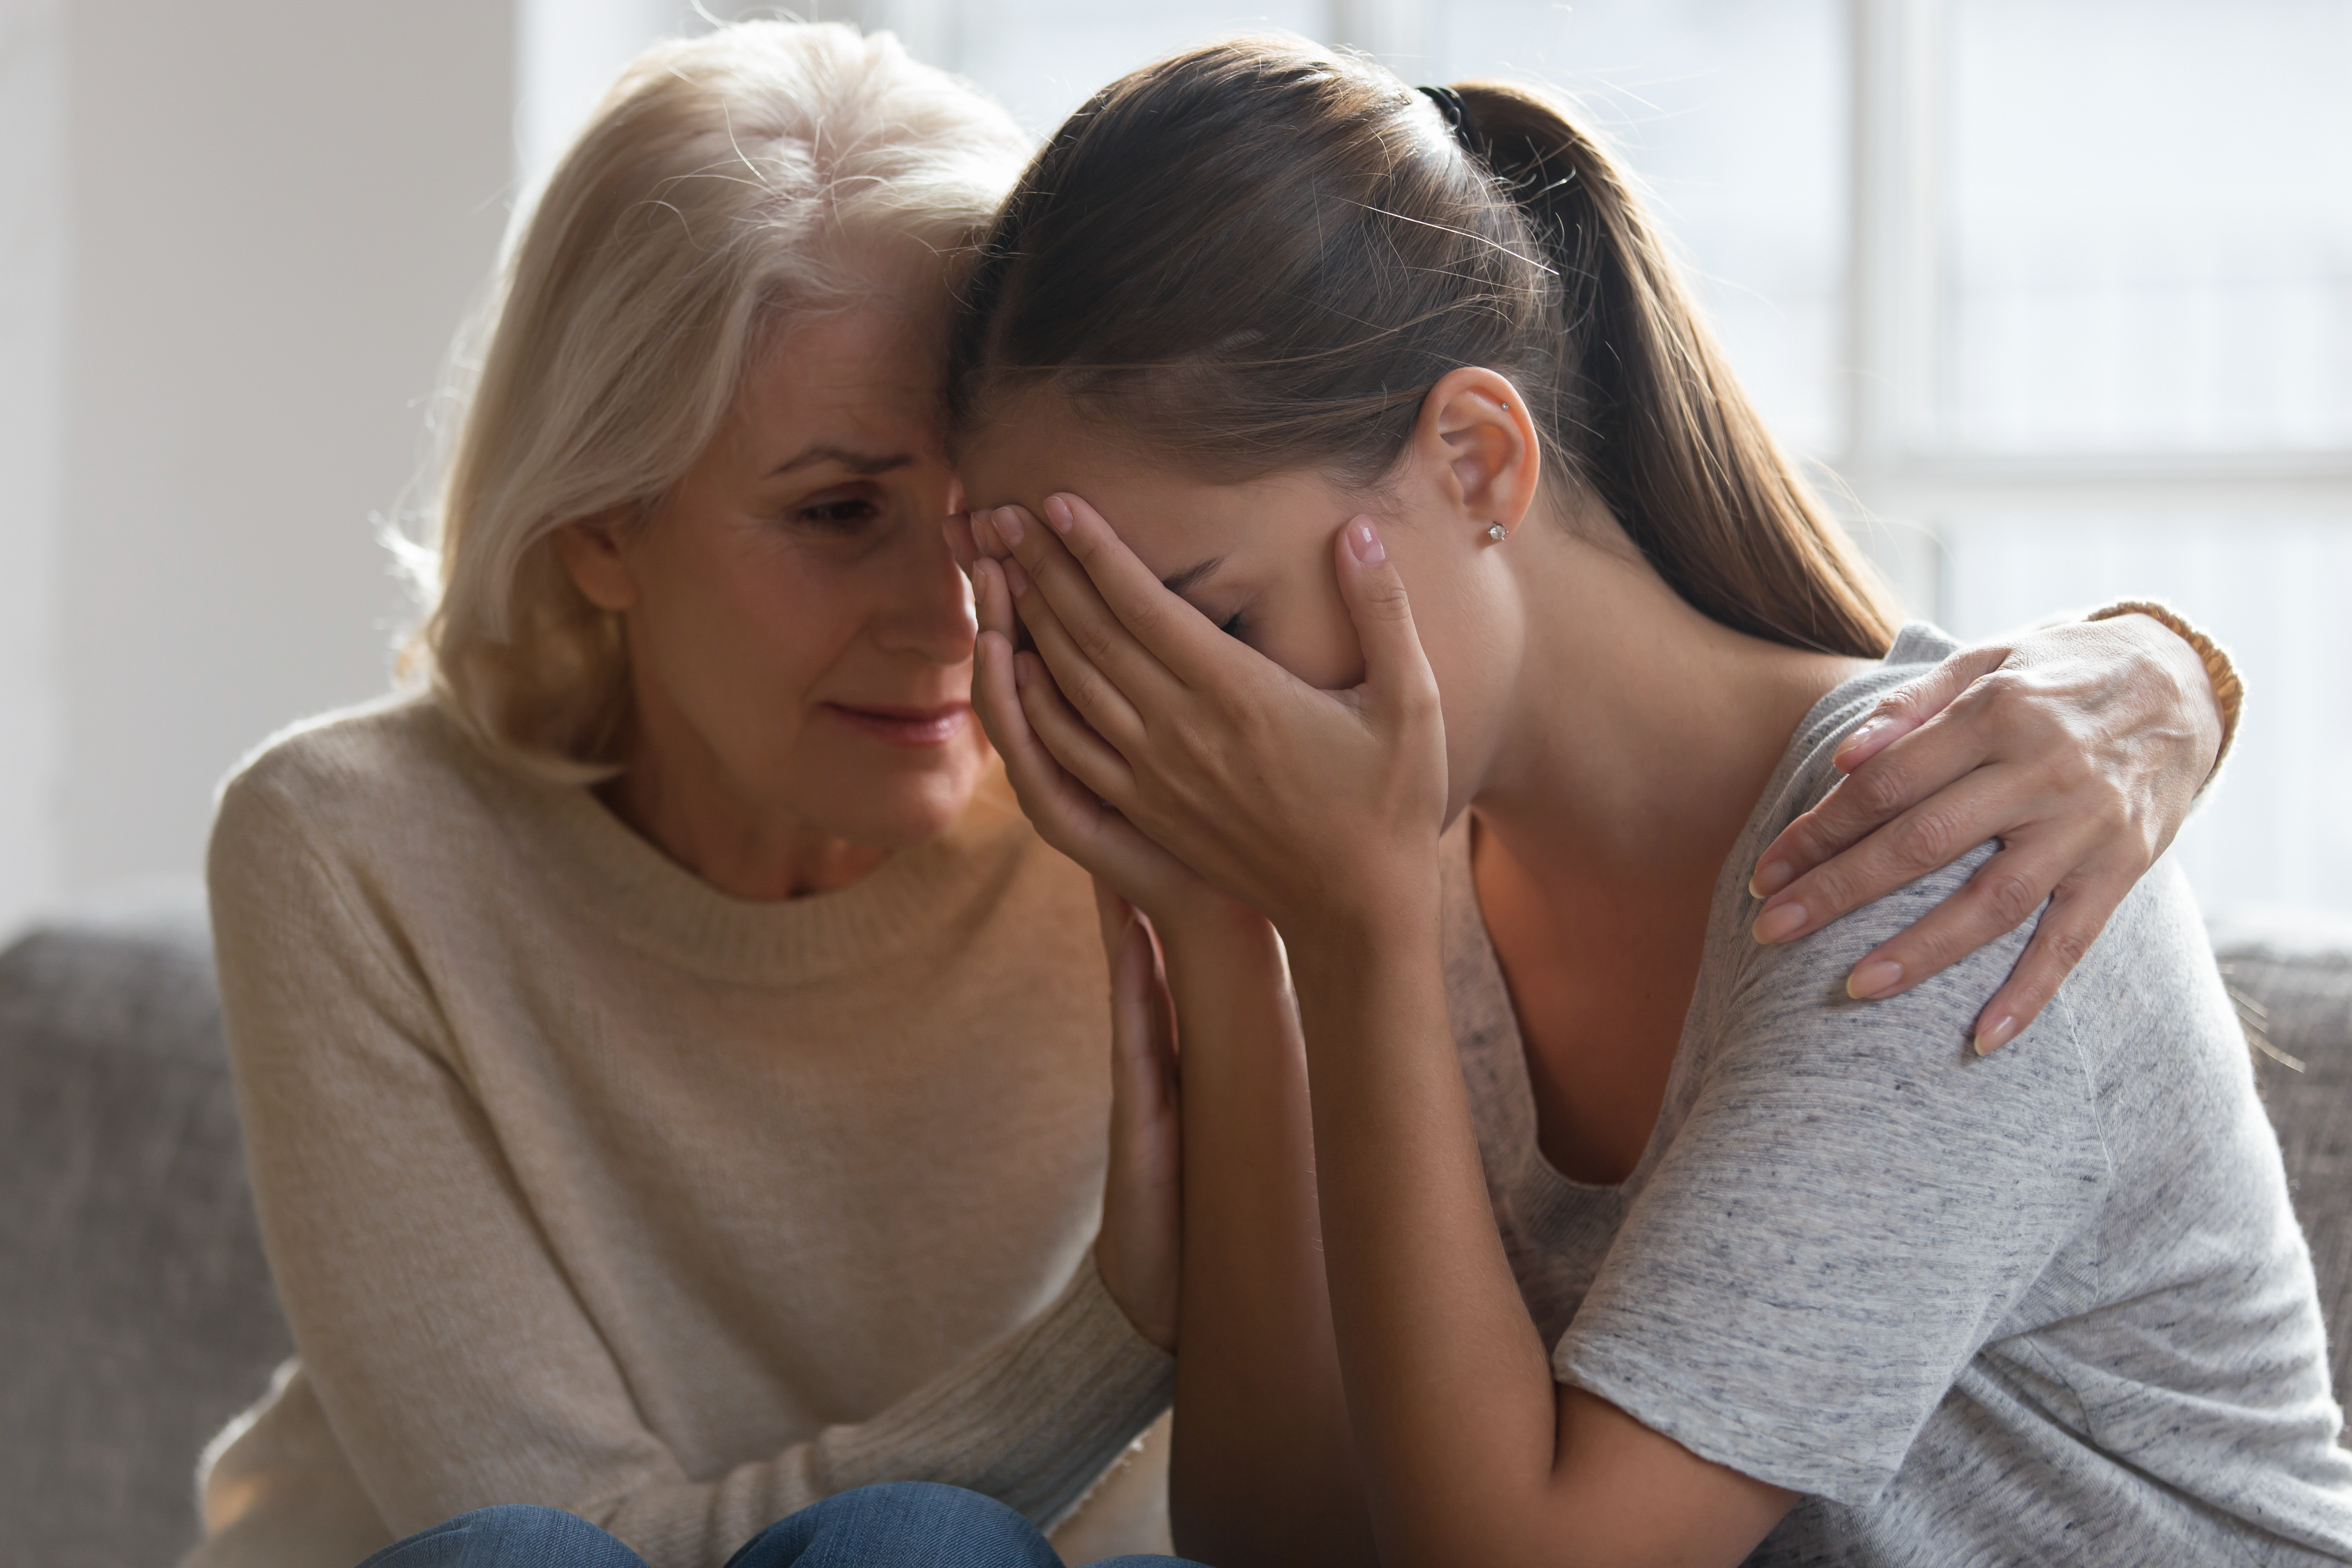 Worried aged mother embracing comforting grown up daughter | Source: Shutterstock